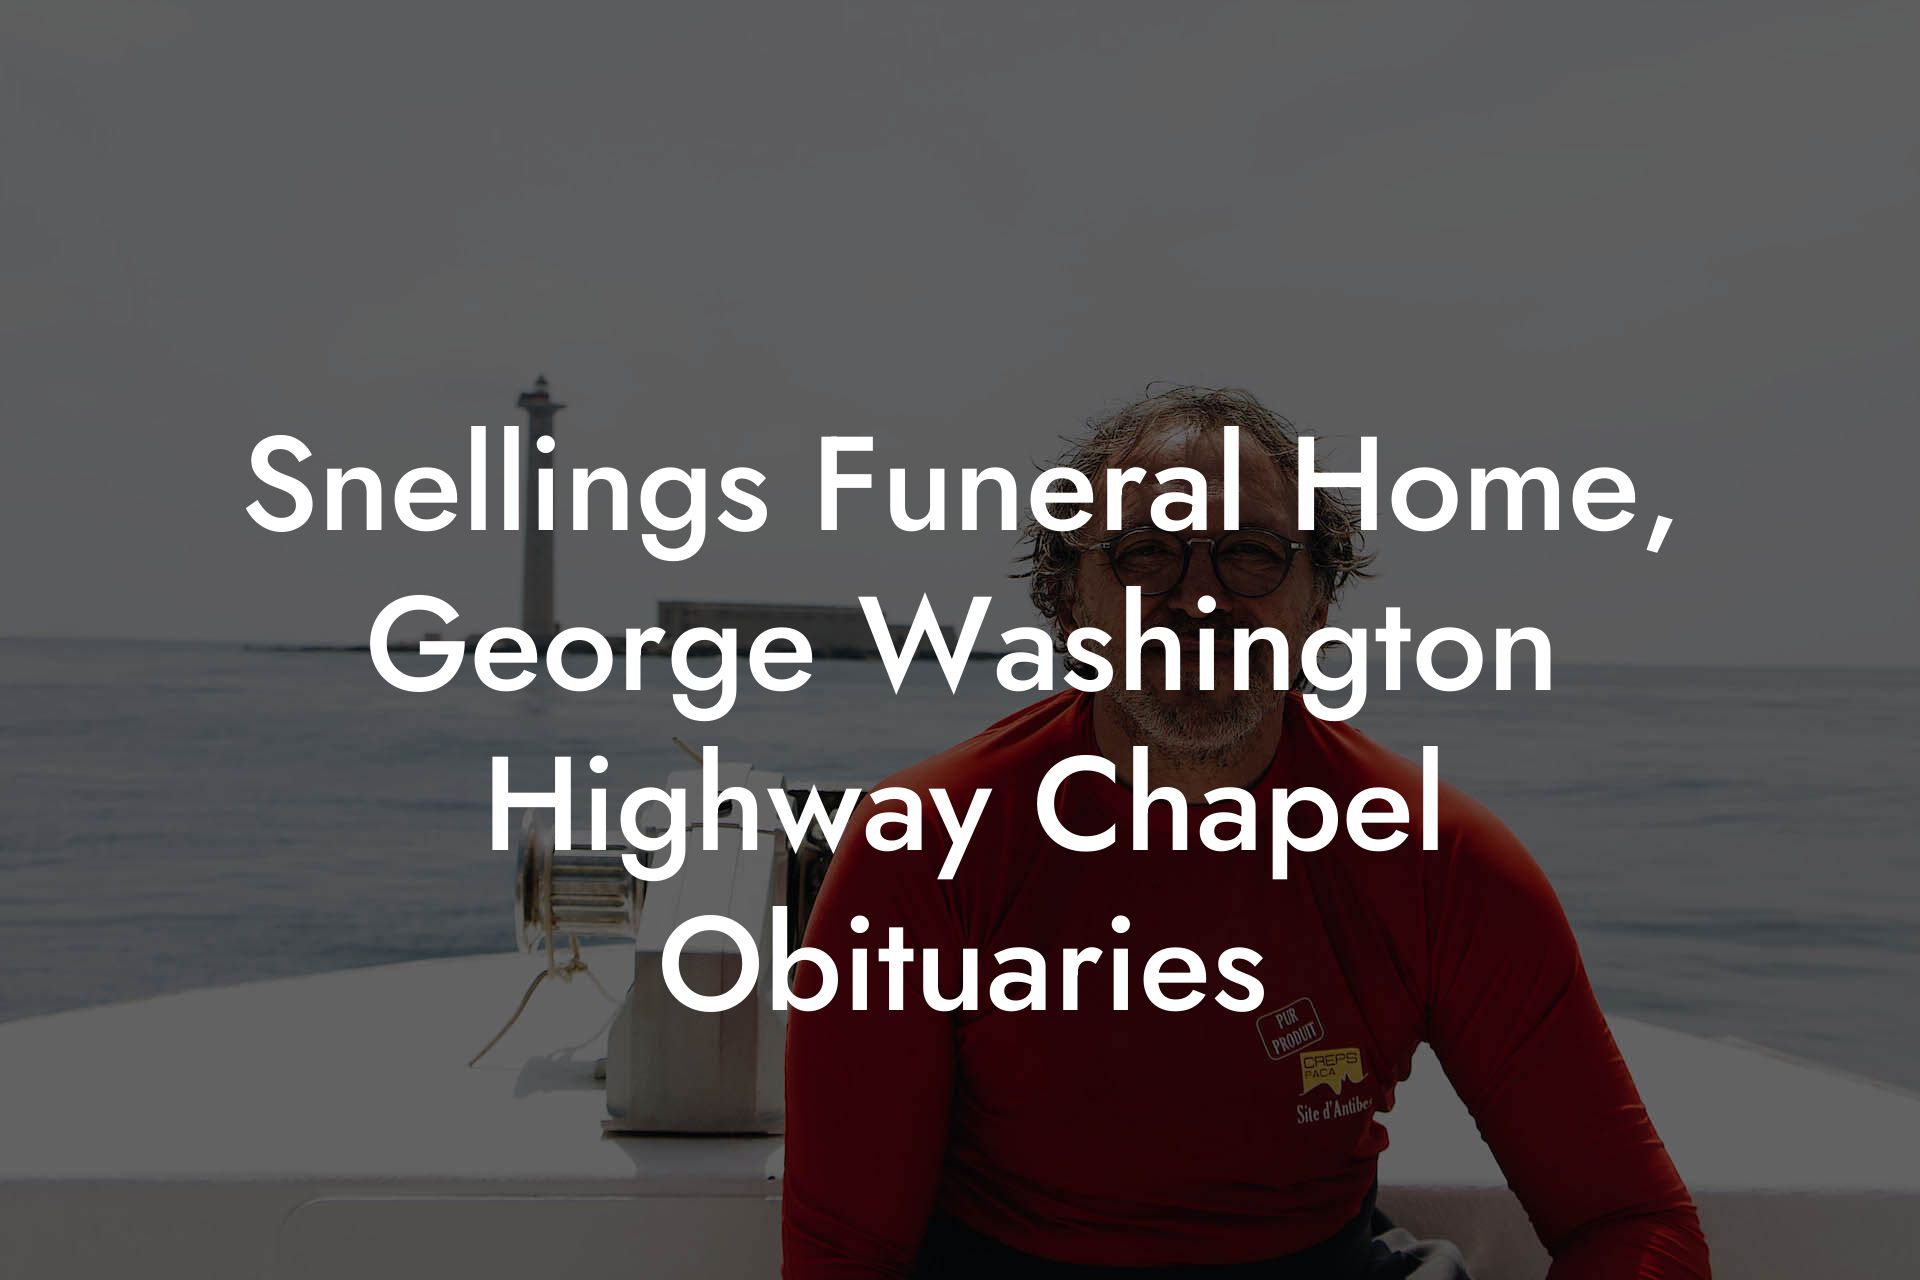 Snellings Funeral Home, George Washington Highway Chapel Obituaries